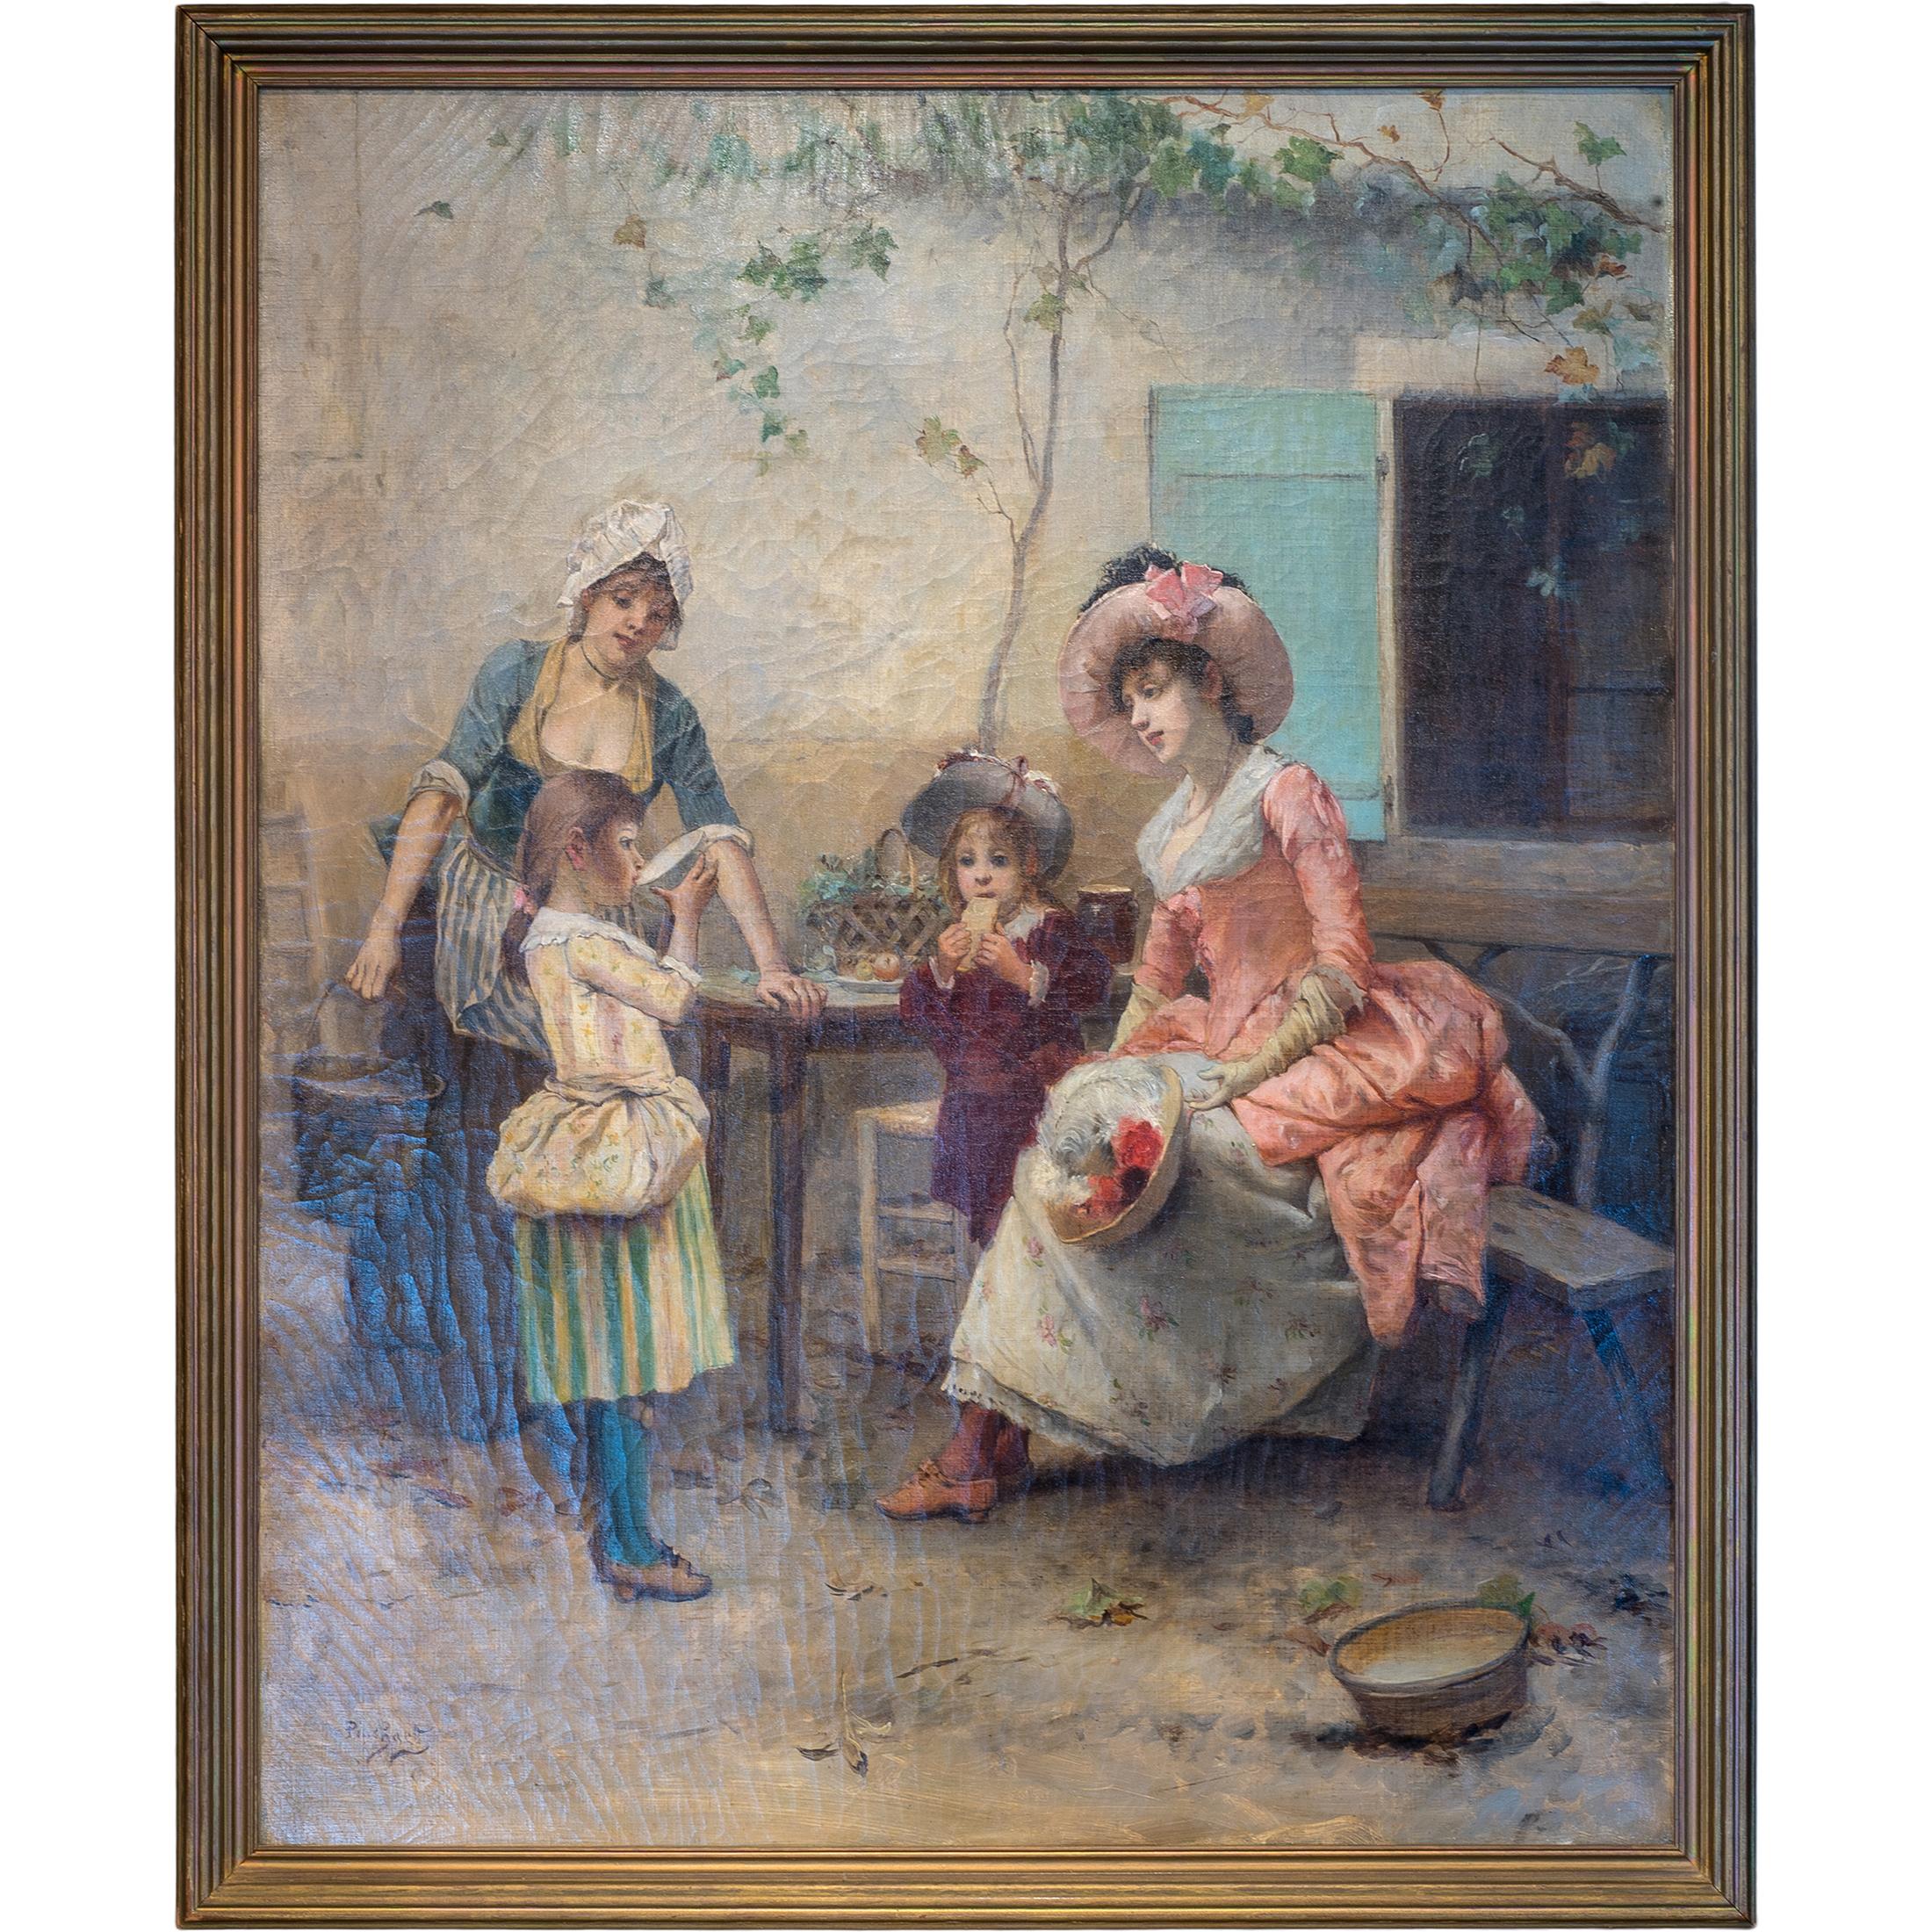 Oil painting depicting a Women and children enjoying an alfresco lunch. Signed lower left 